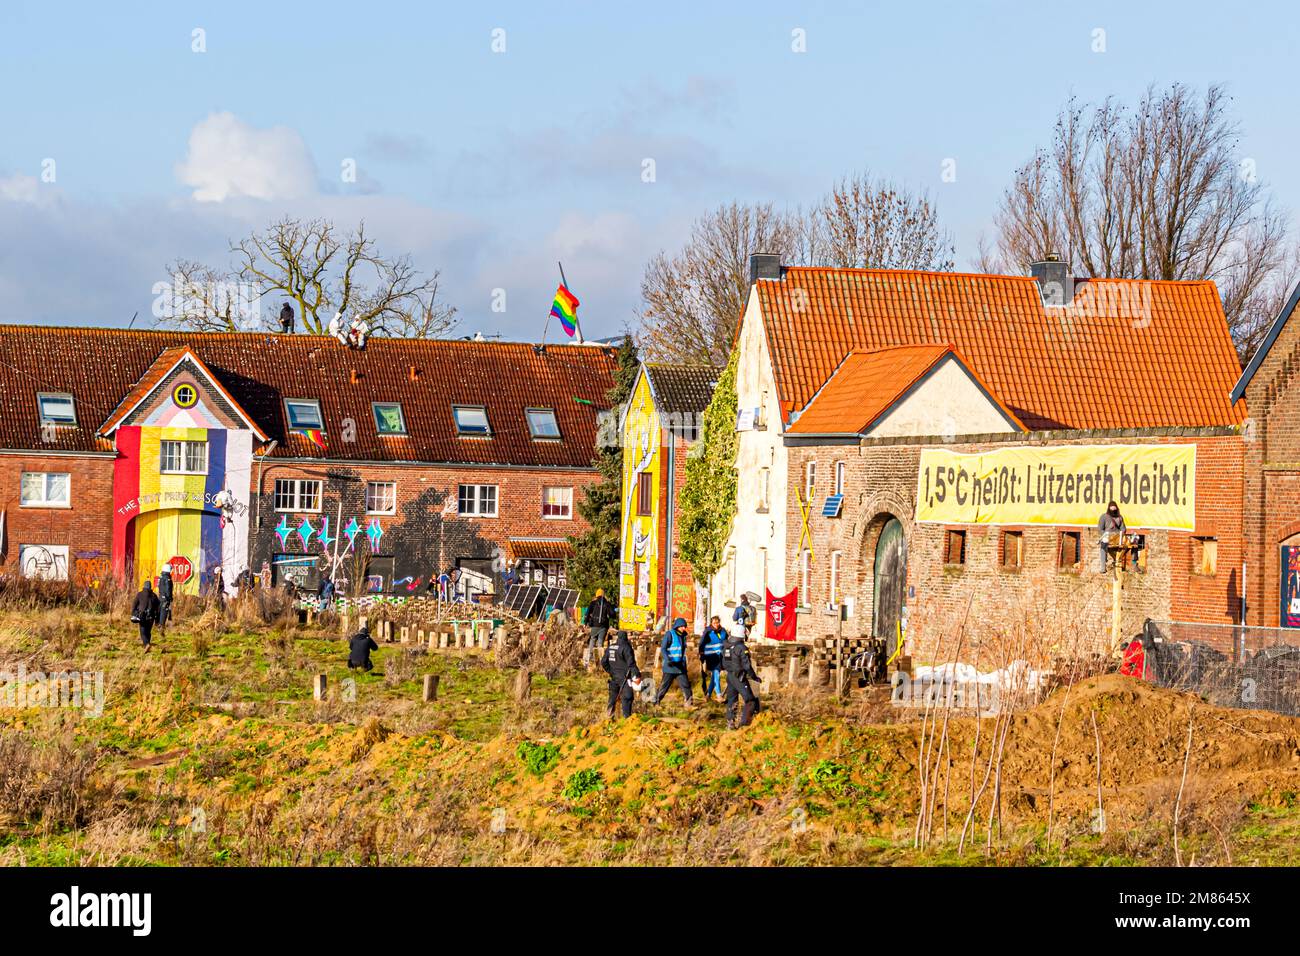 Tense atmosphere before the clearing of the lignite village of Lützerath. Barricades and trenches impede access to the village buildings occupied by climate activists Stock Photo